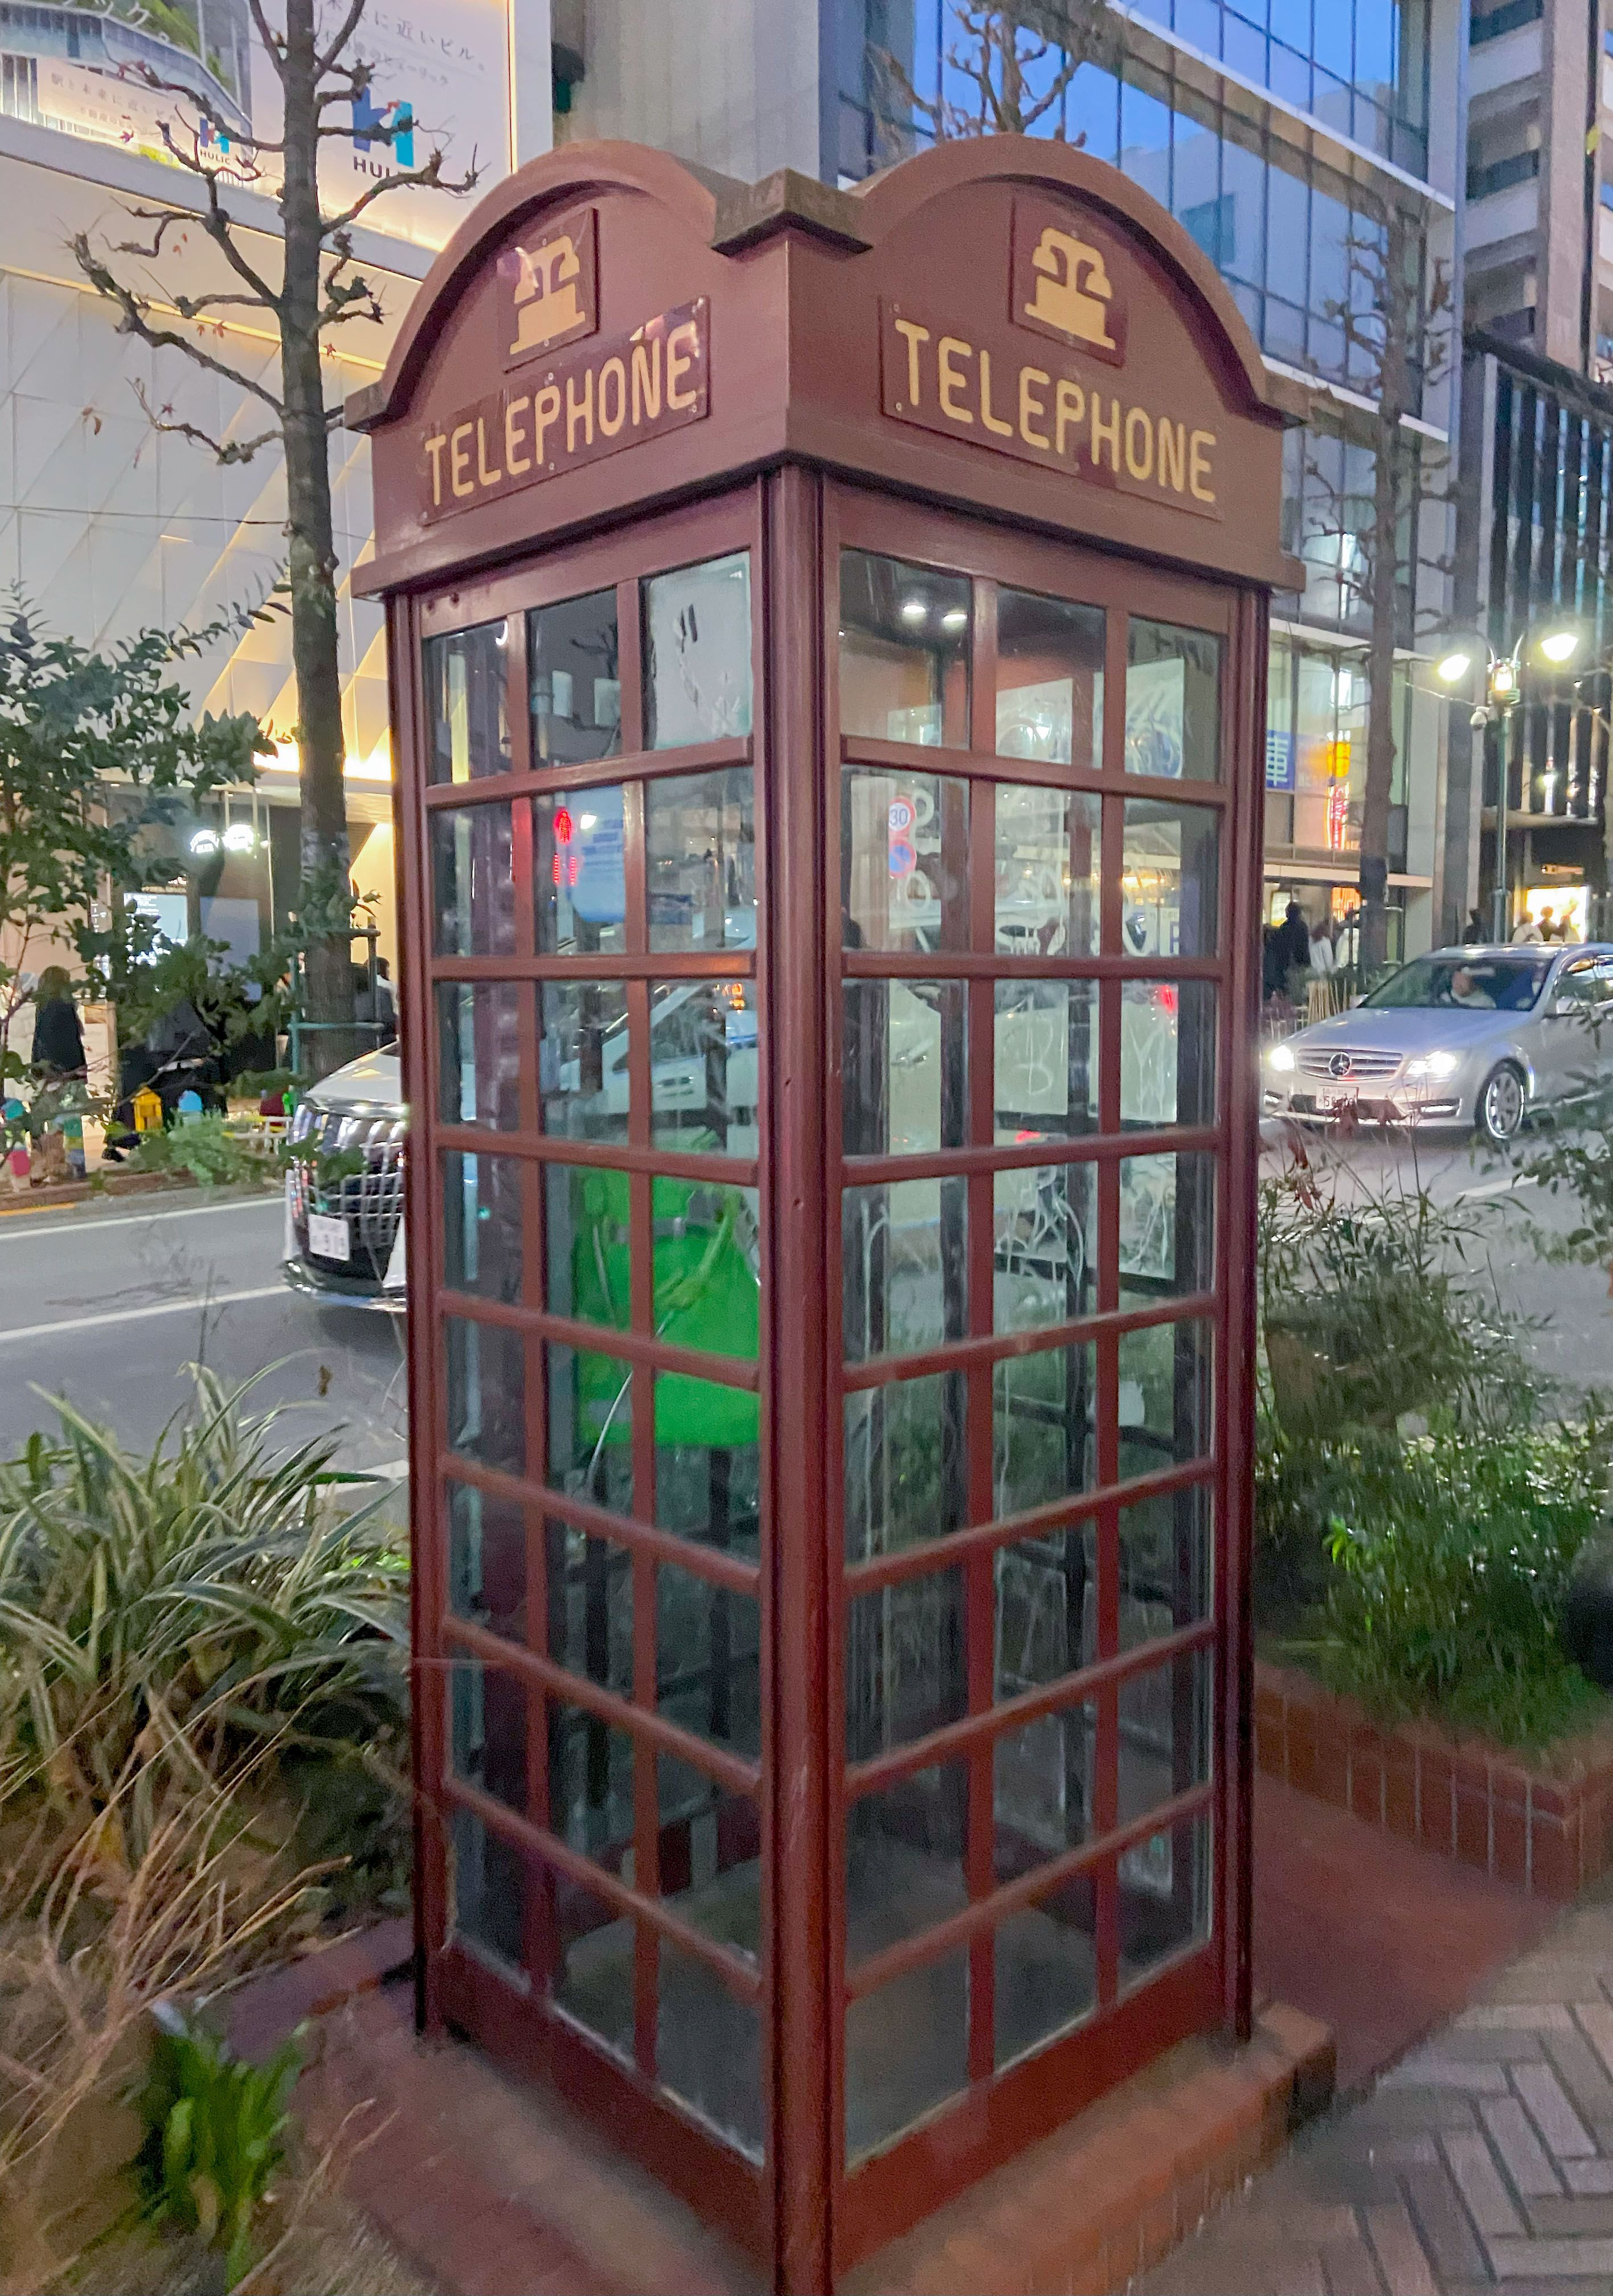 Funny phone booth